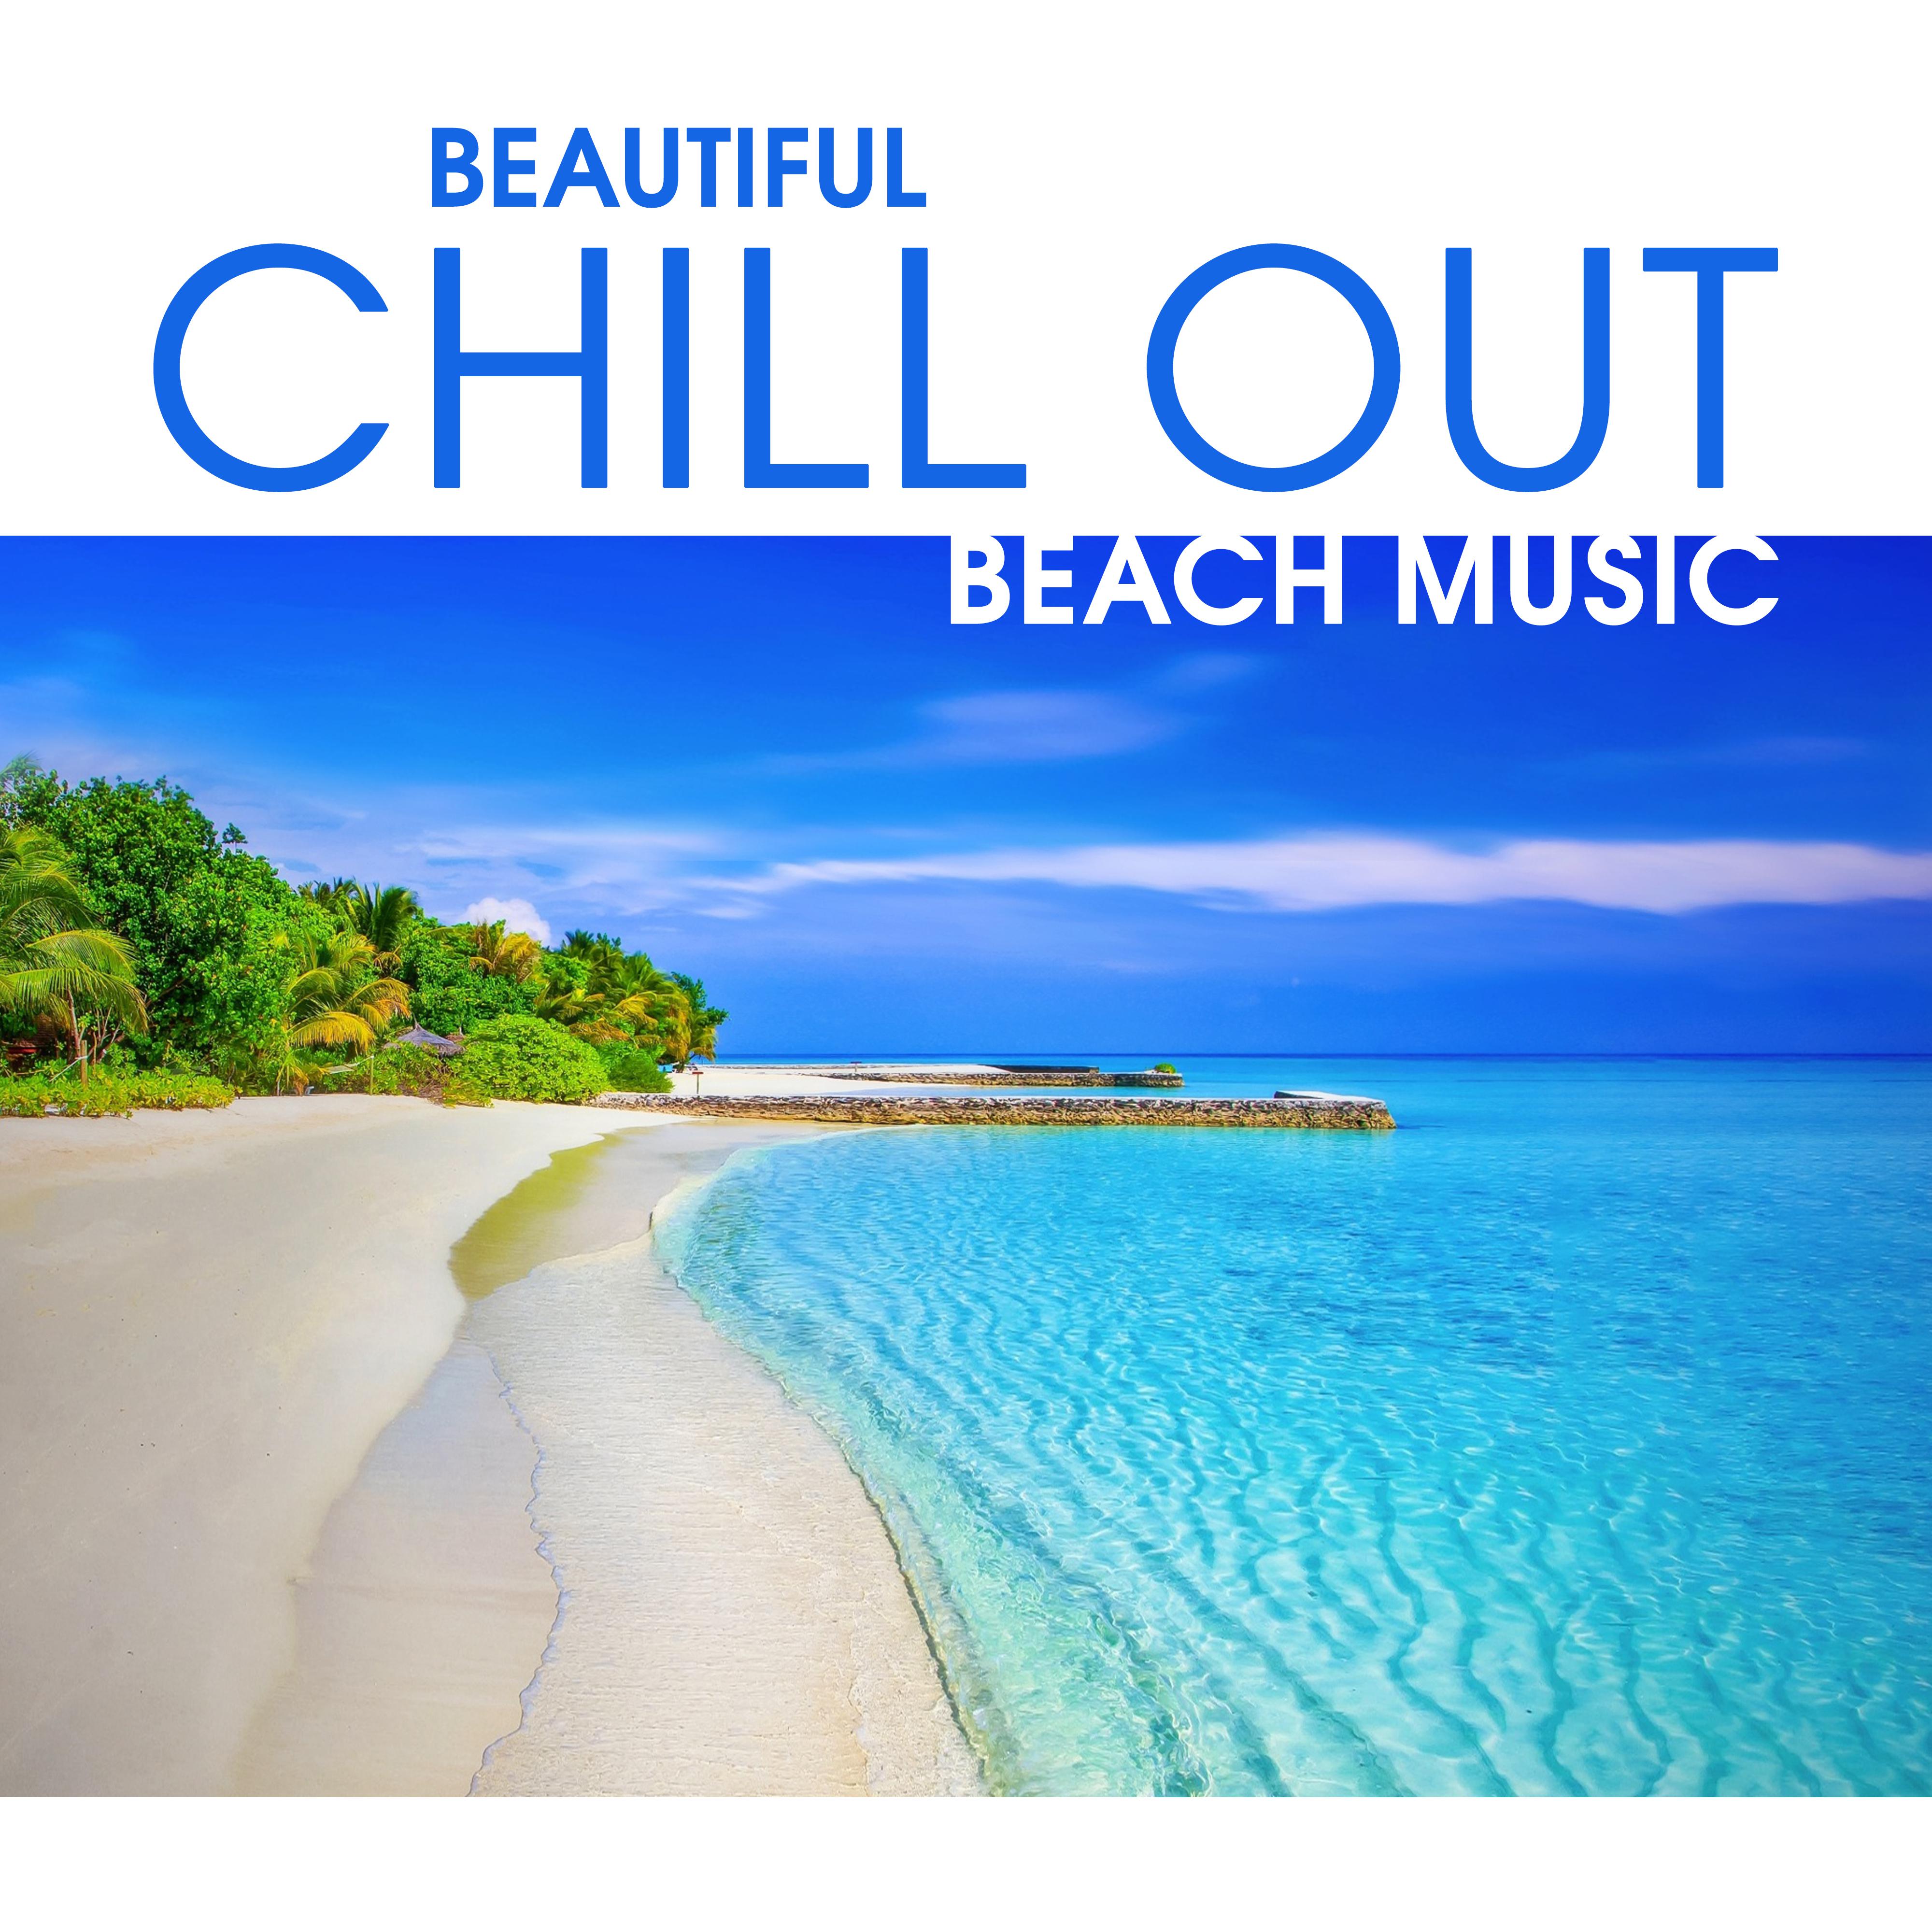 Beautiful Chill Out Beach Music – Easy Listening, Summer Beach Lounge, Chill Out Vibes 2017